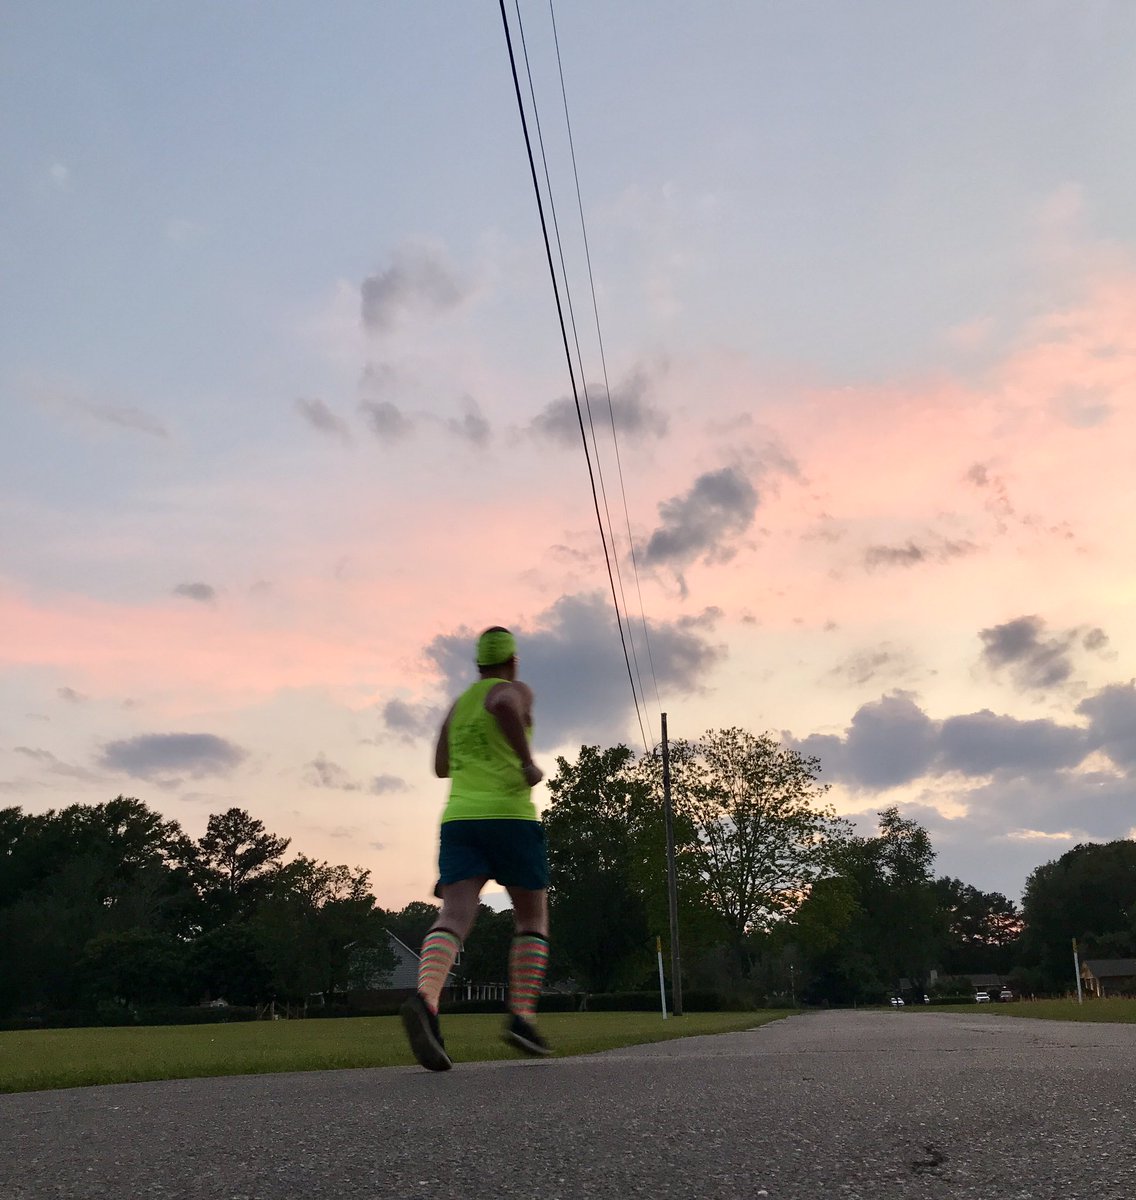 Turning it up to help the sun down.

4.1 miles.

#IStandWithYou #teamnuun #HSHive #PROAlumni #SquirrelsNutButter #shokzstar #shokzquad #TeamROADiD #TeamULTRA #LeagueOfGarmin #RunChat #WeRunSocial #IHeartTally